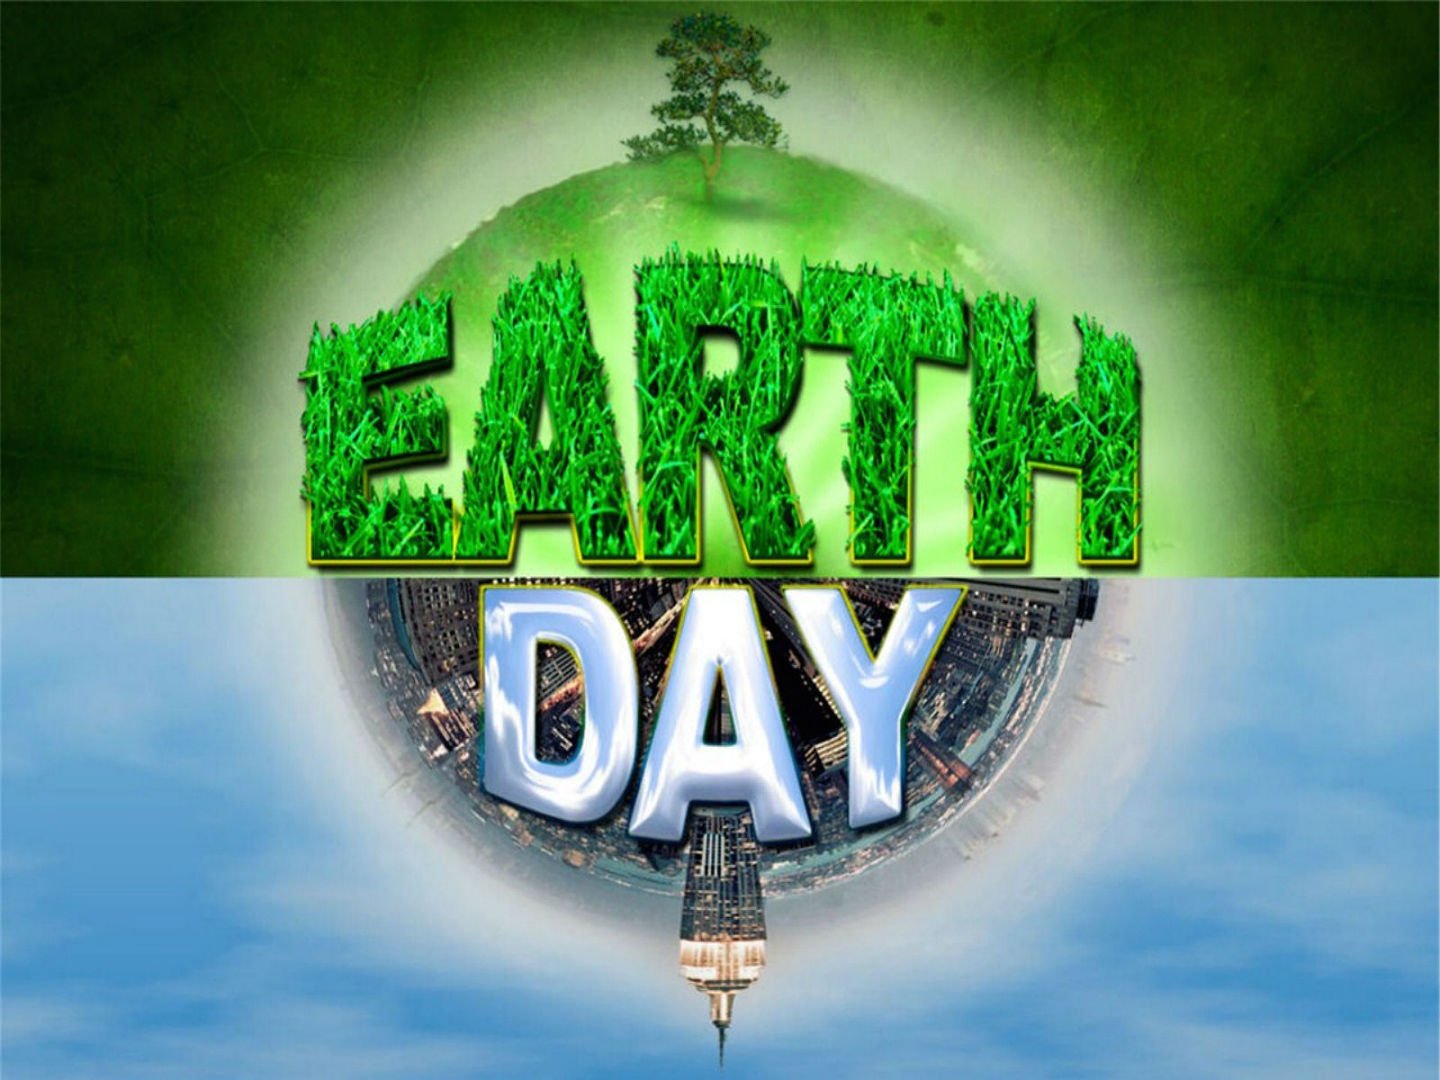 earth, Day, Nature, Earthday, Poster, Holiday, Spring, April, Planet, Poster, Text, Quote Wallpaper